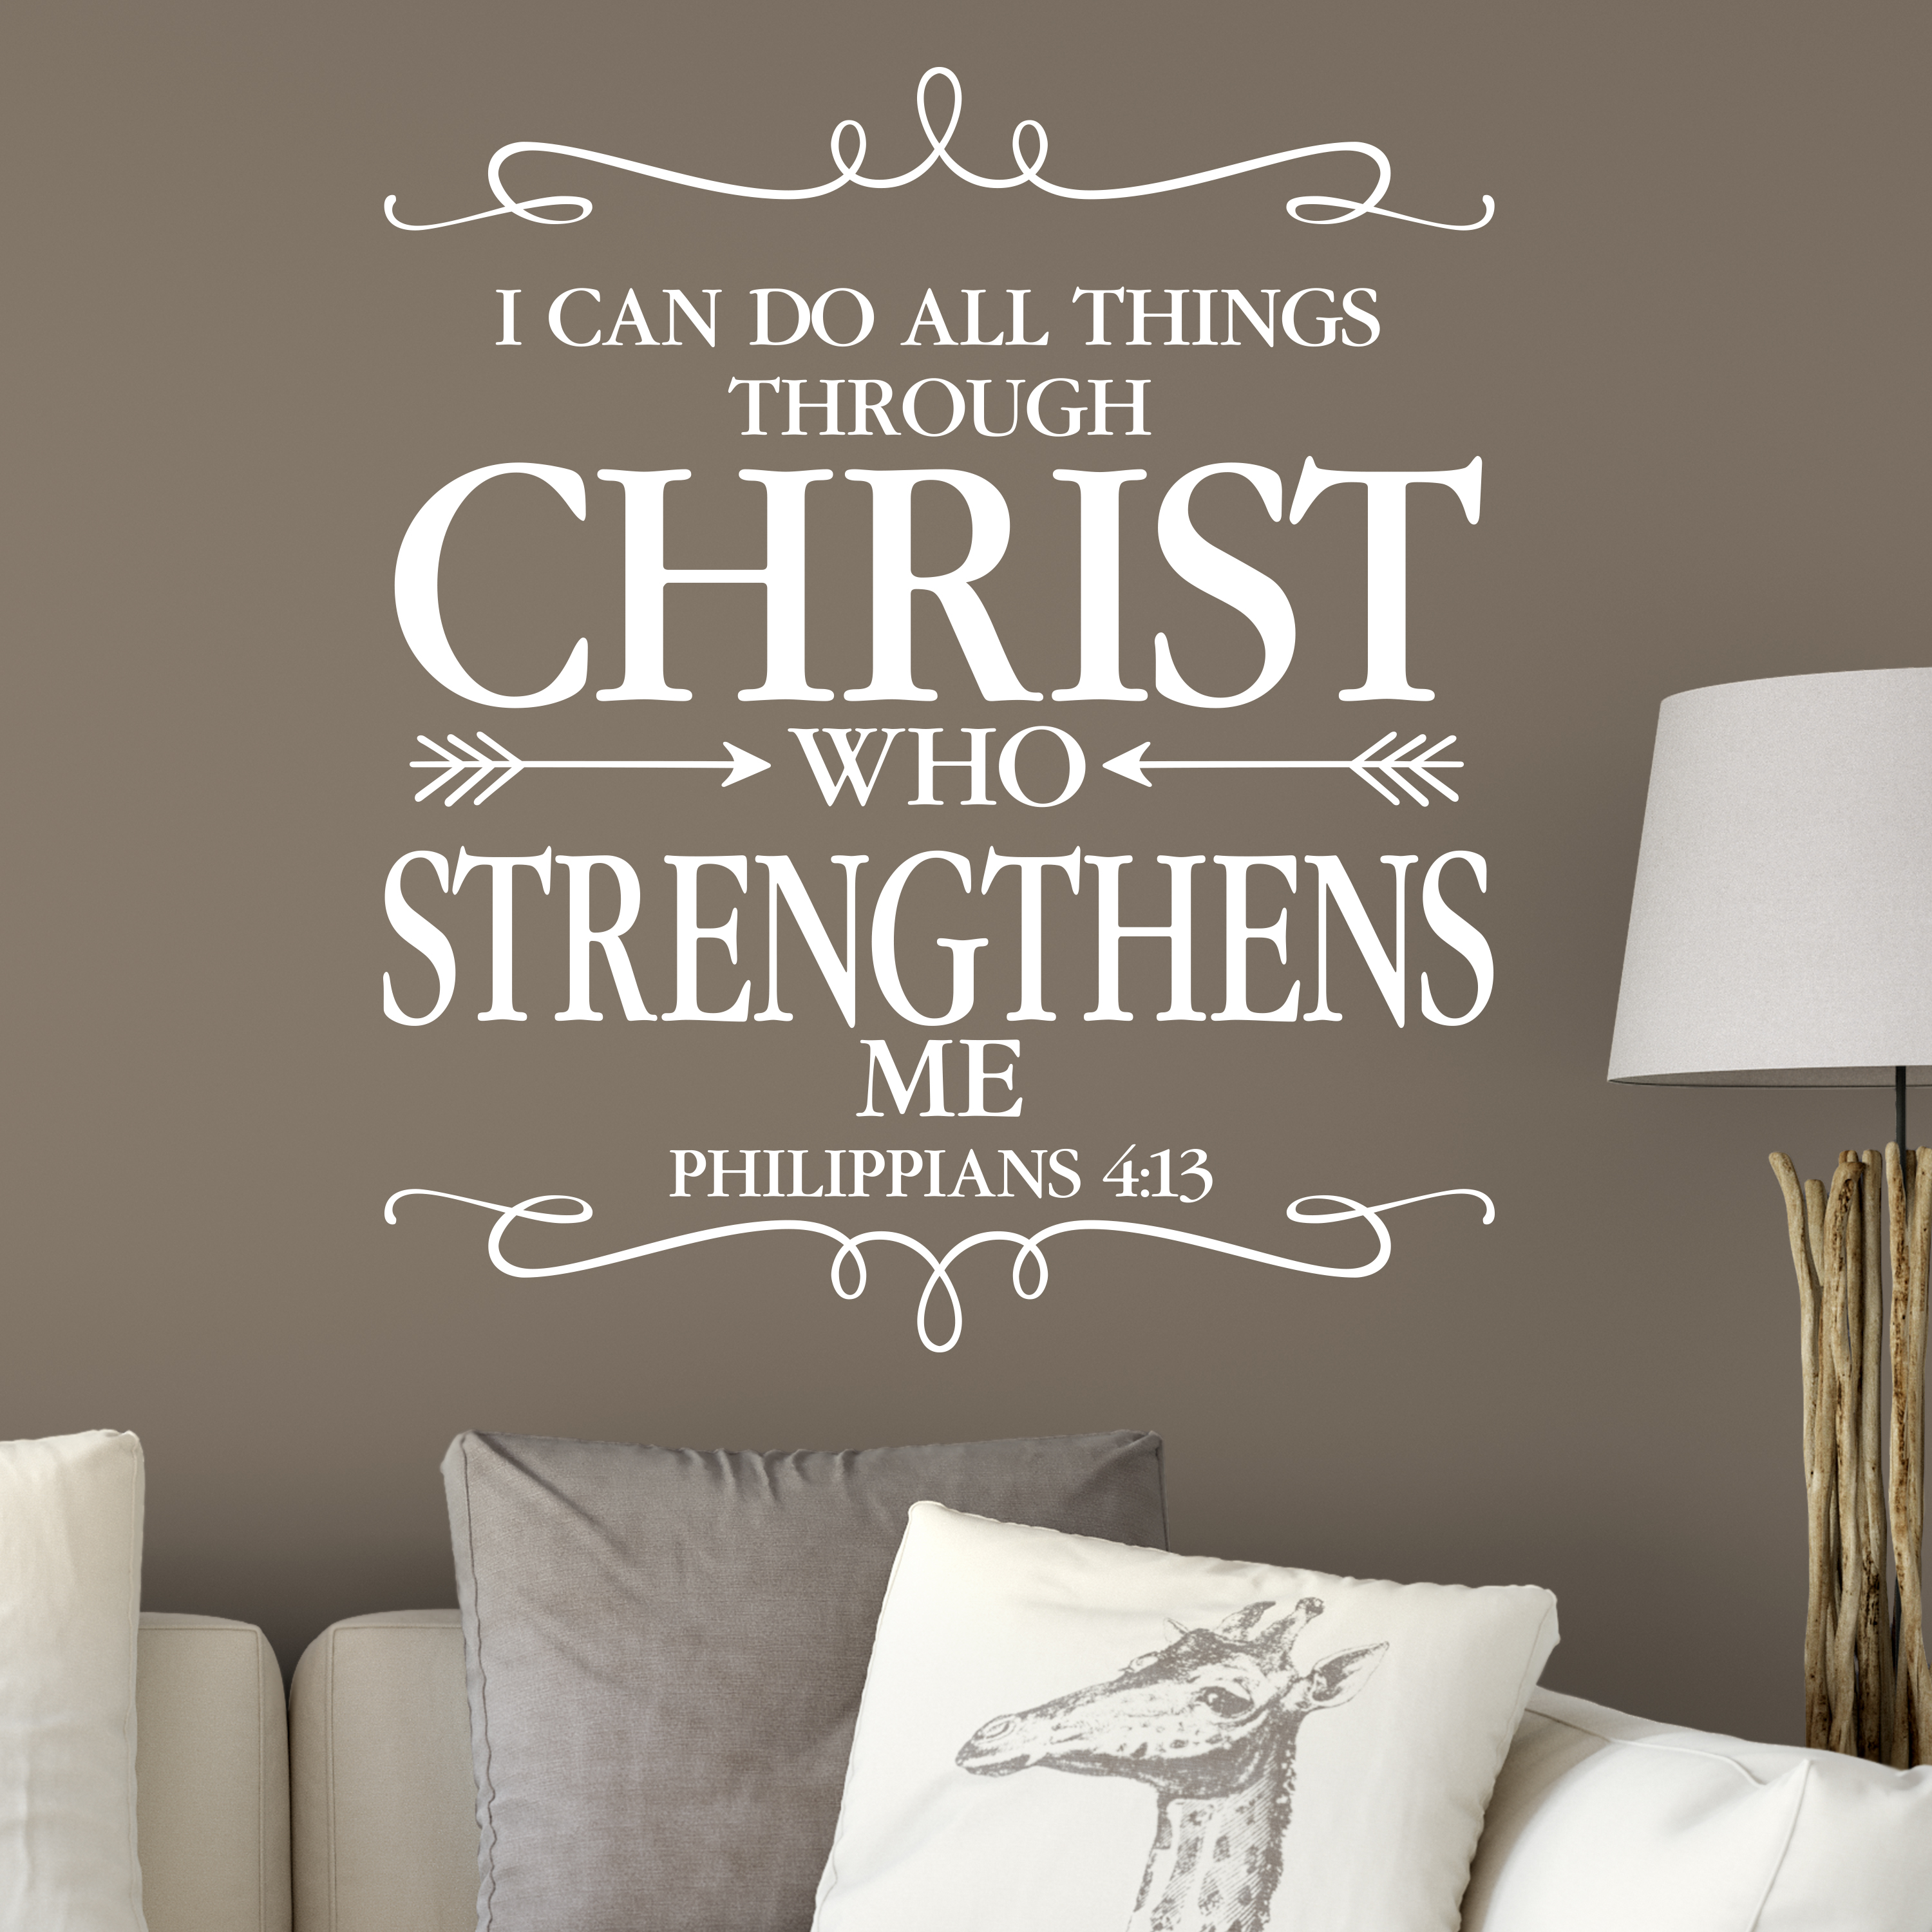 I CAN DO ALL THINGS THROUGH CHRIST PHILIPPIANS 4:13 VINYL WALL DECAL QUOTE 